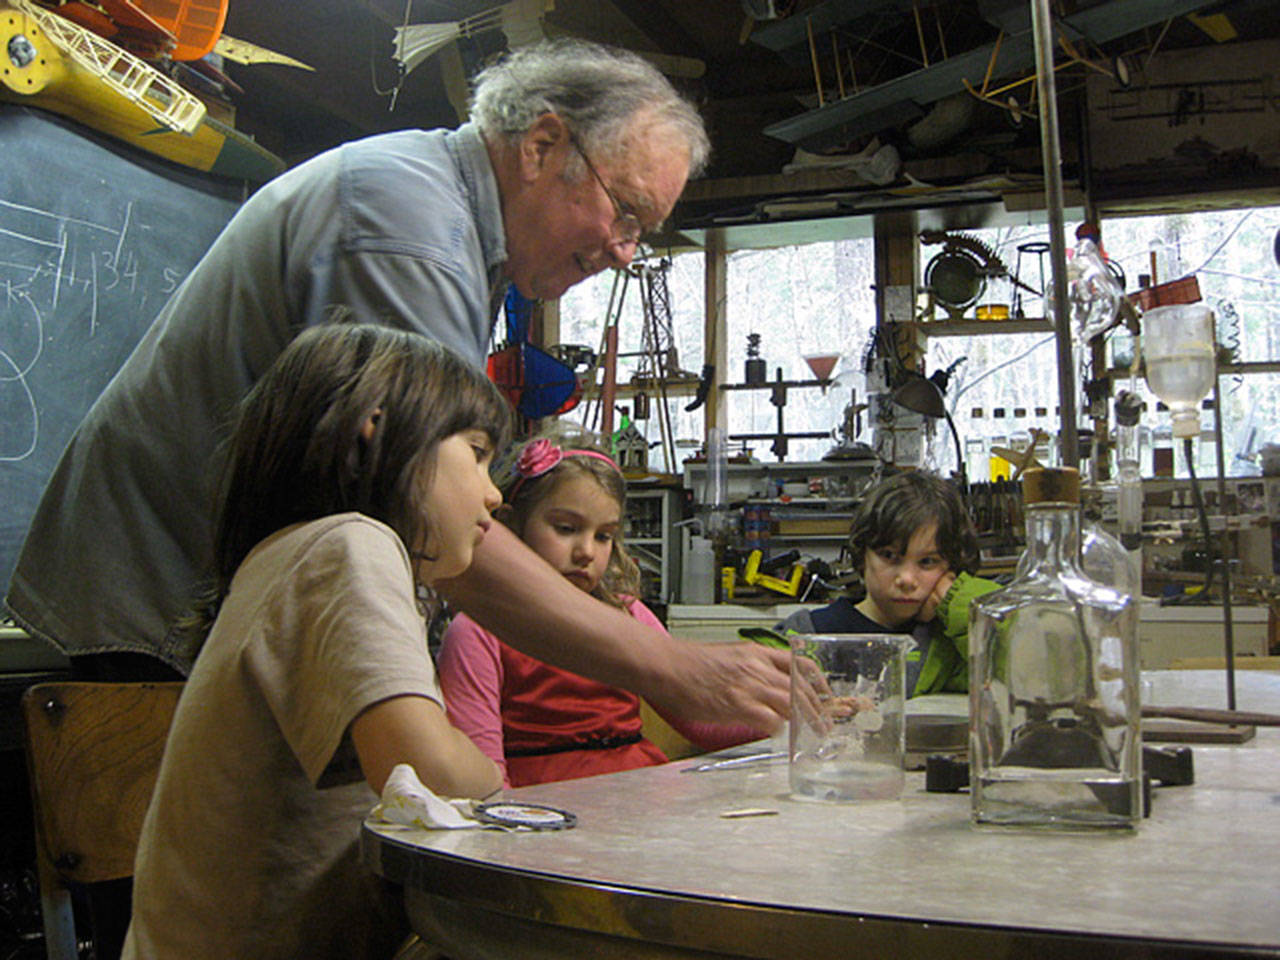 In this 2014 photo, teacher Leonard Good leads young students through an experiment in his science classroom located behind his Langley home. Laboratory equipment, model airplanes and educational material were lost to a fire Wednesday that heavily damaged the structure’s roof and storage attic. (Photo provided)